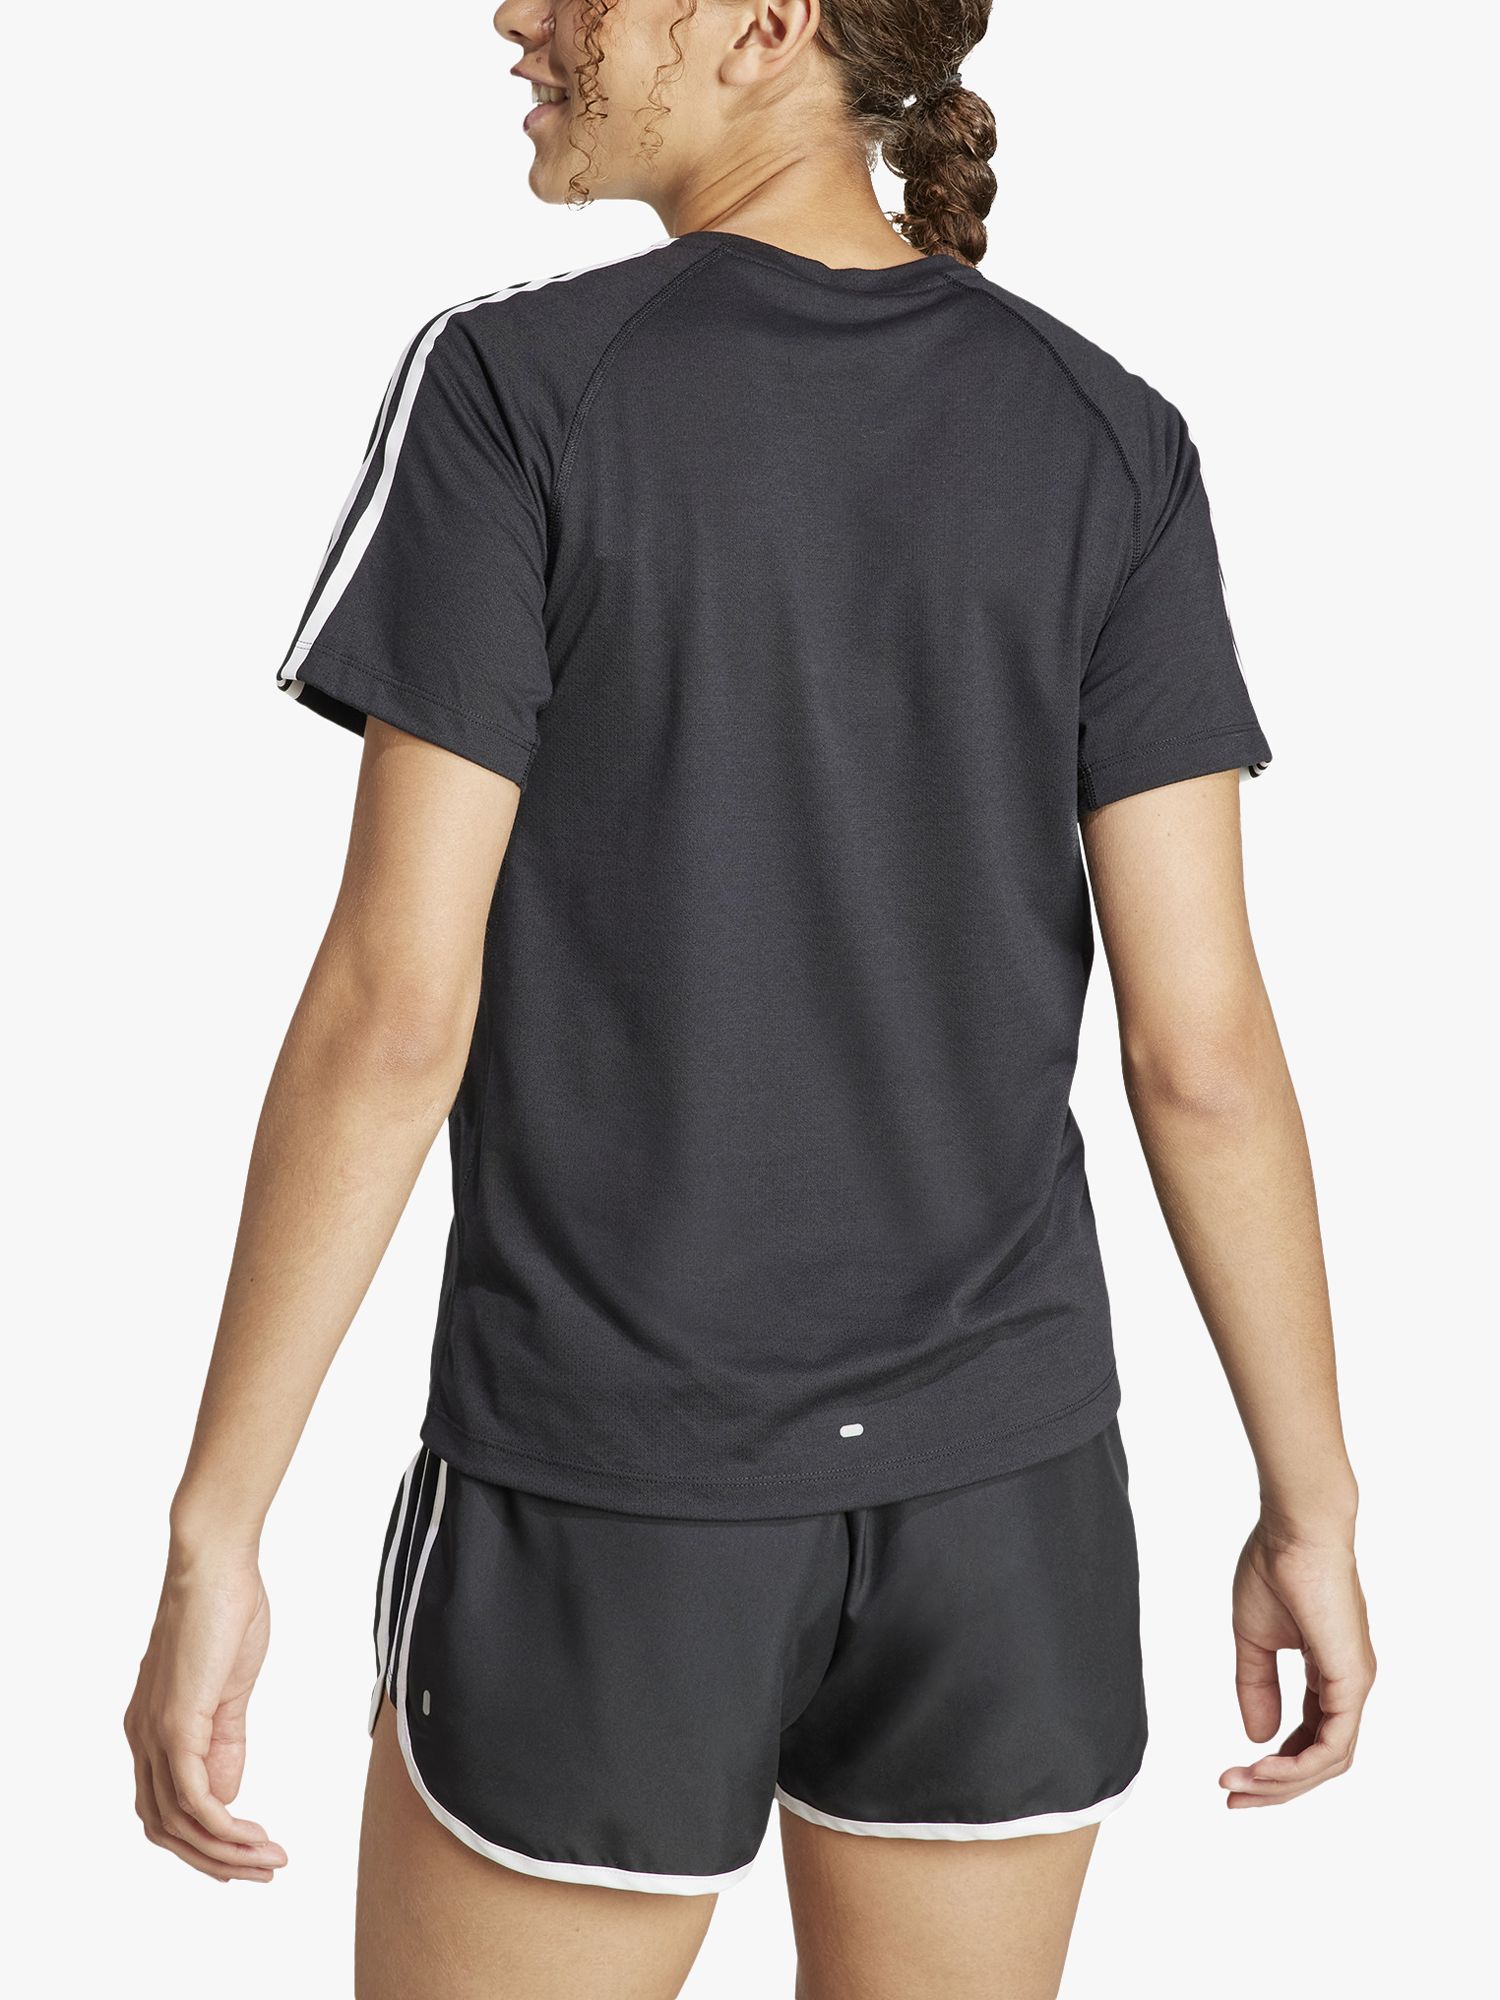 adidas Own The Run 3 Stripes Short Sleeve Recycled Running Top, Black, XS